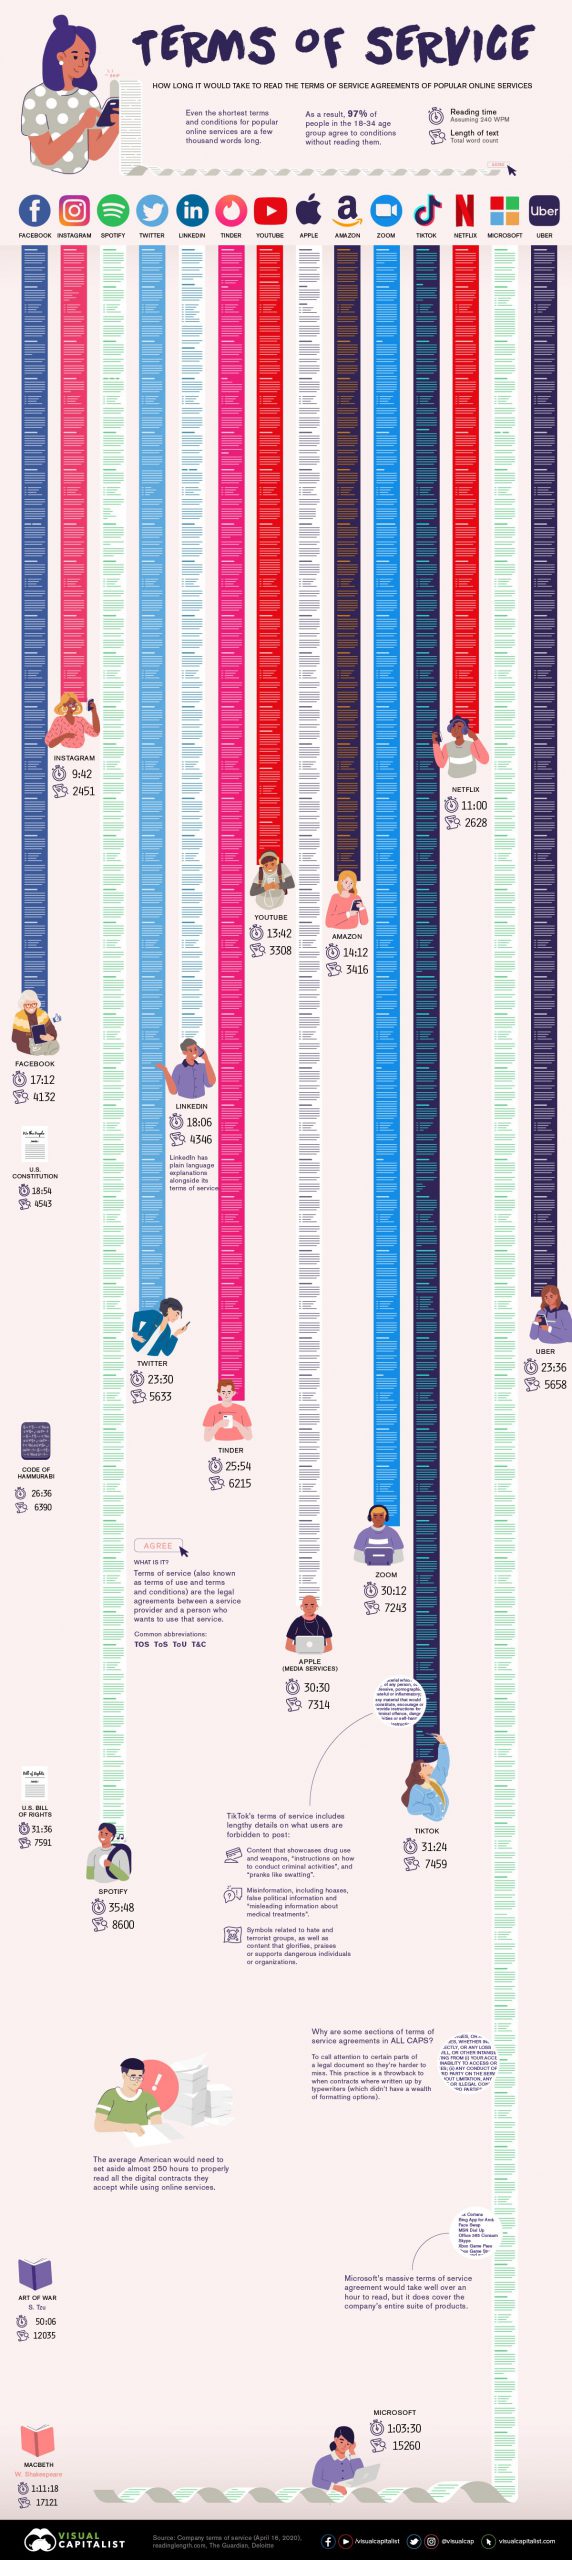 how long does it take to read the terms of service for each app infographic scaled 1